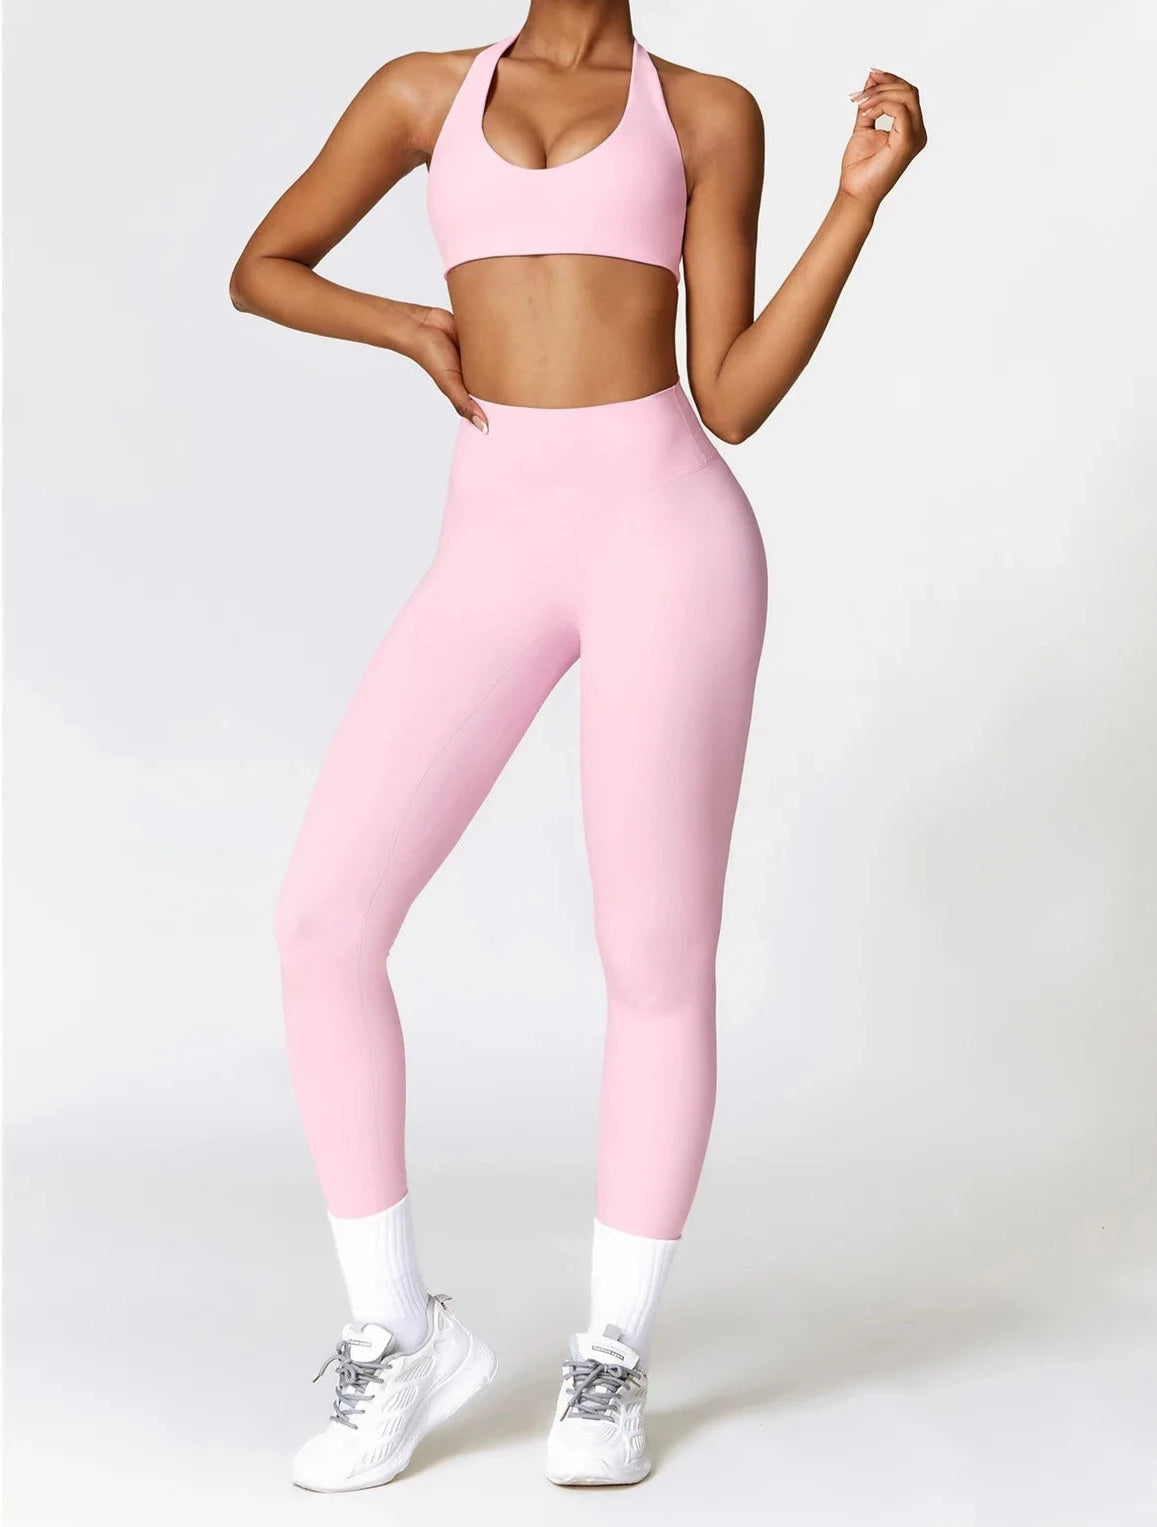 In The Pink: A Fitness Update  Workout attire, Pink workout